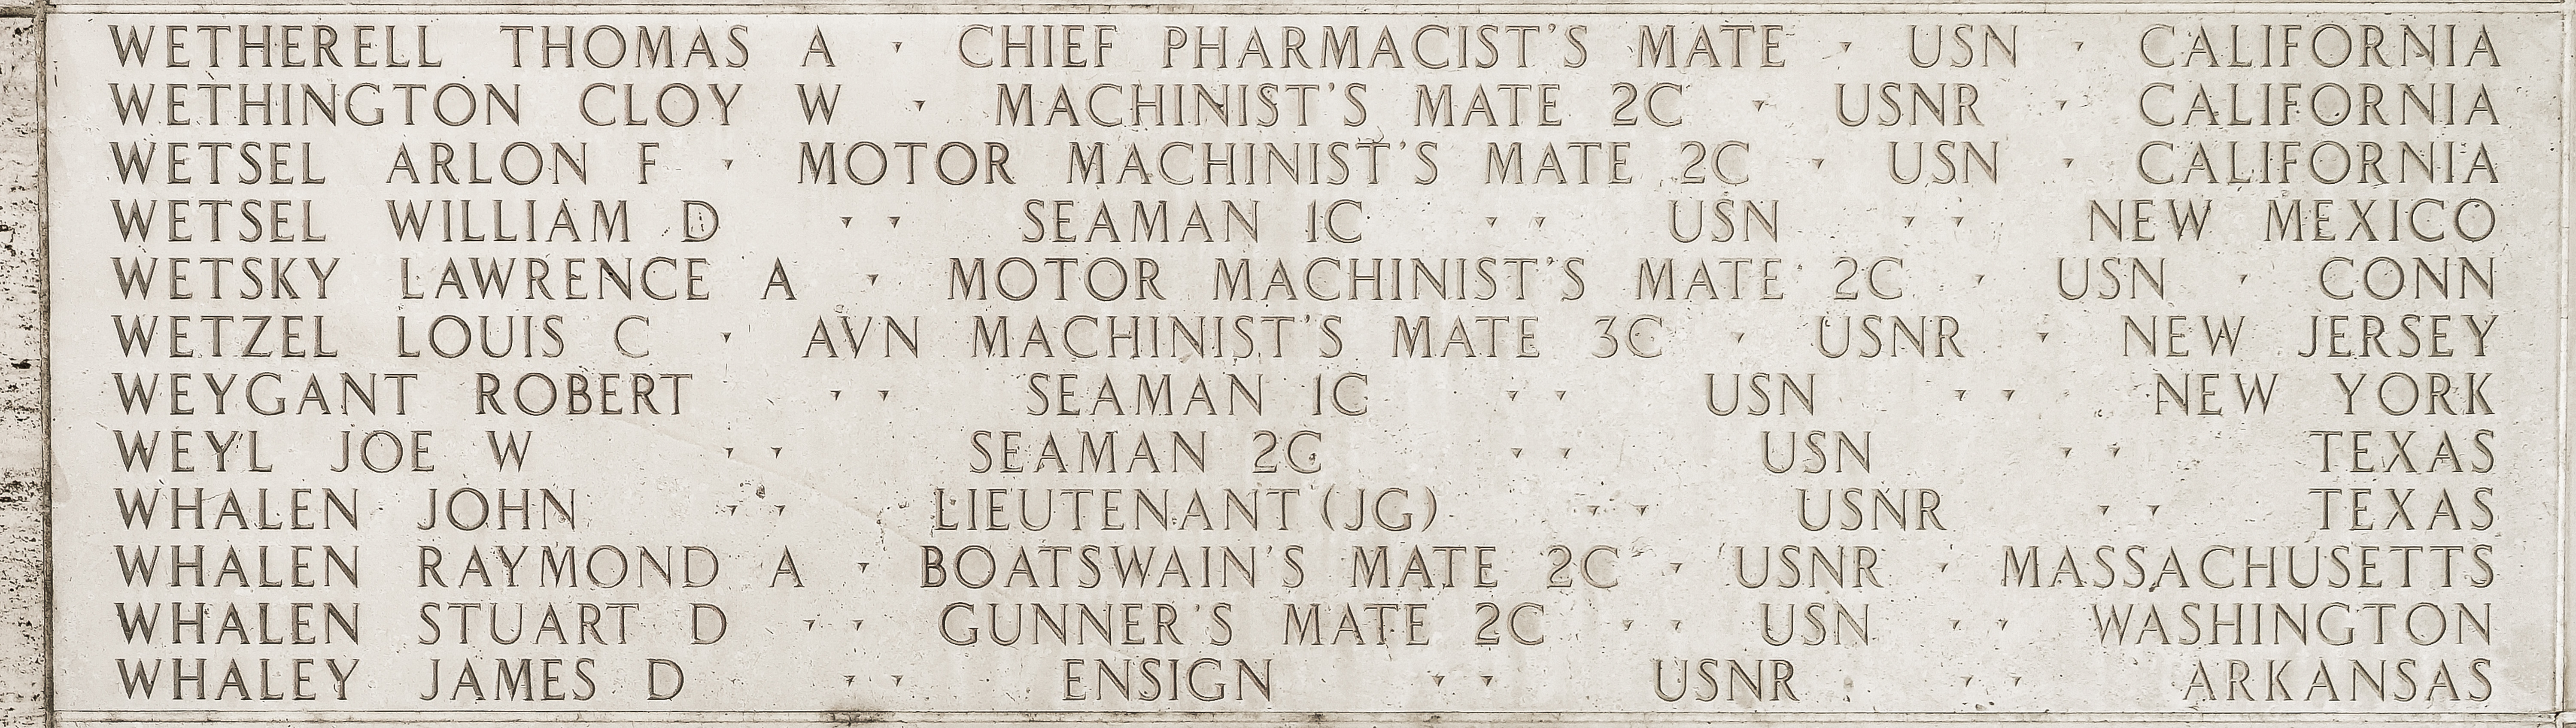 Thomas A. Wetherell, Chief Pharmacist's Mate